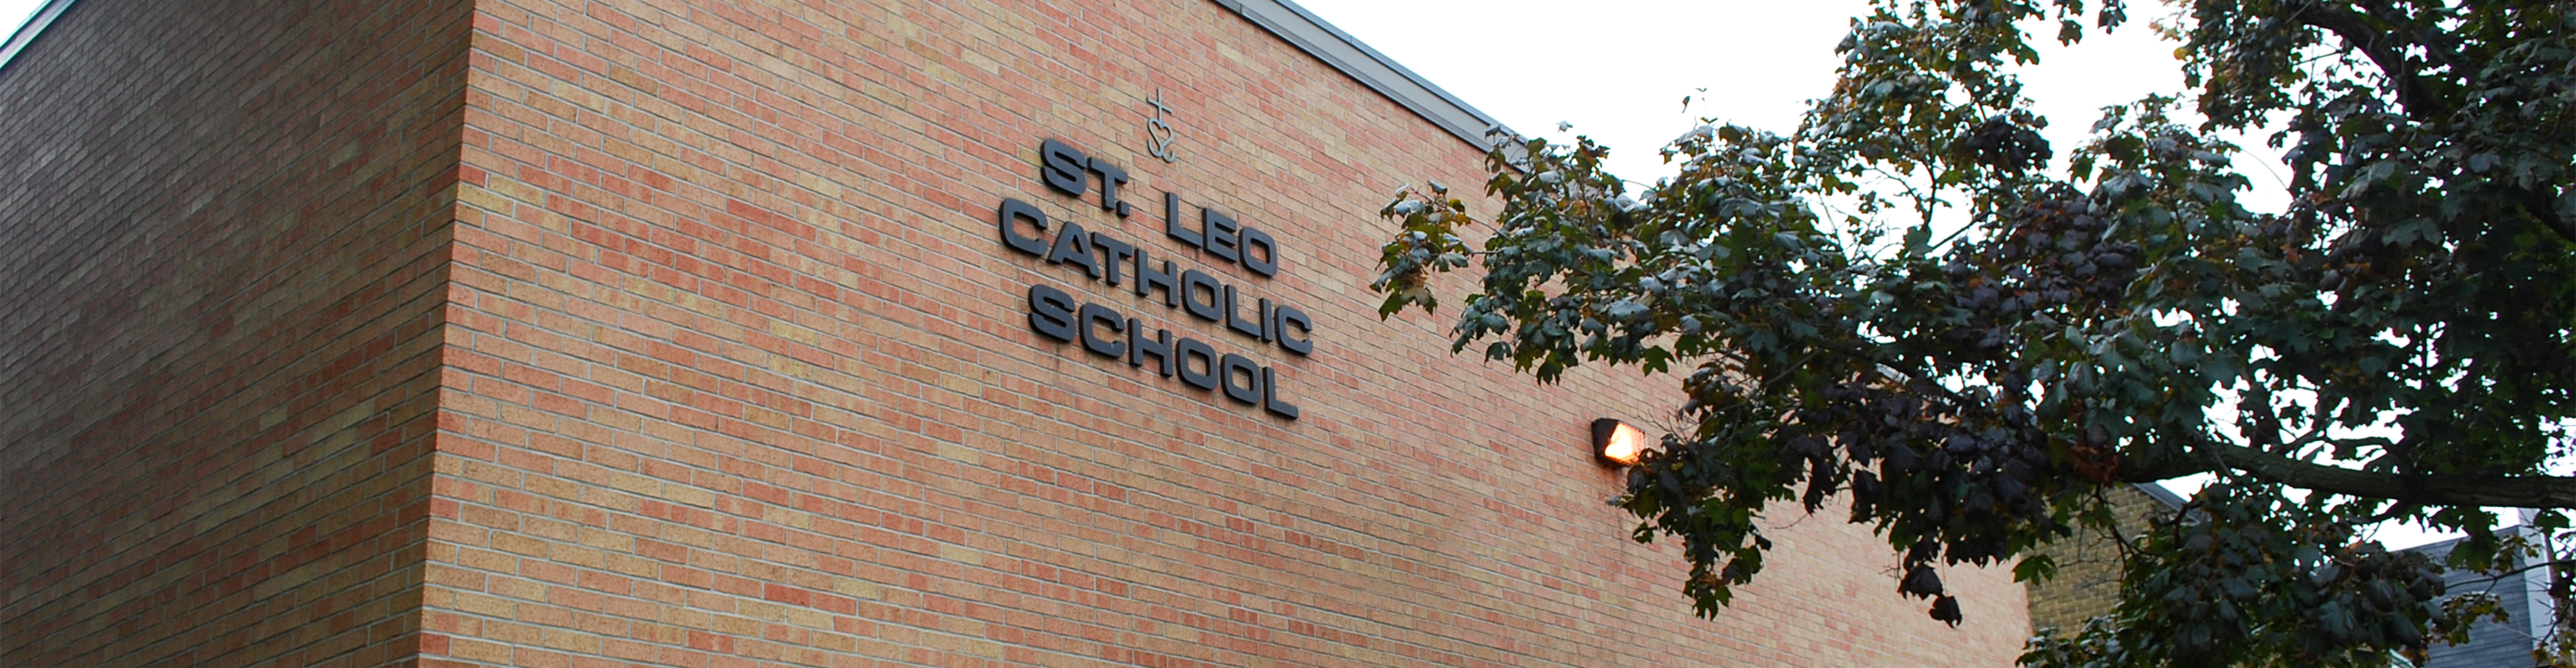 The front of the St. Leo Catholic School building.